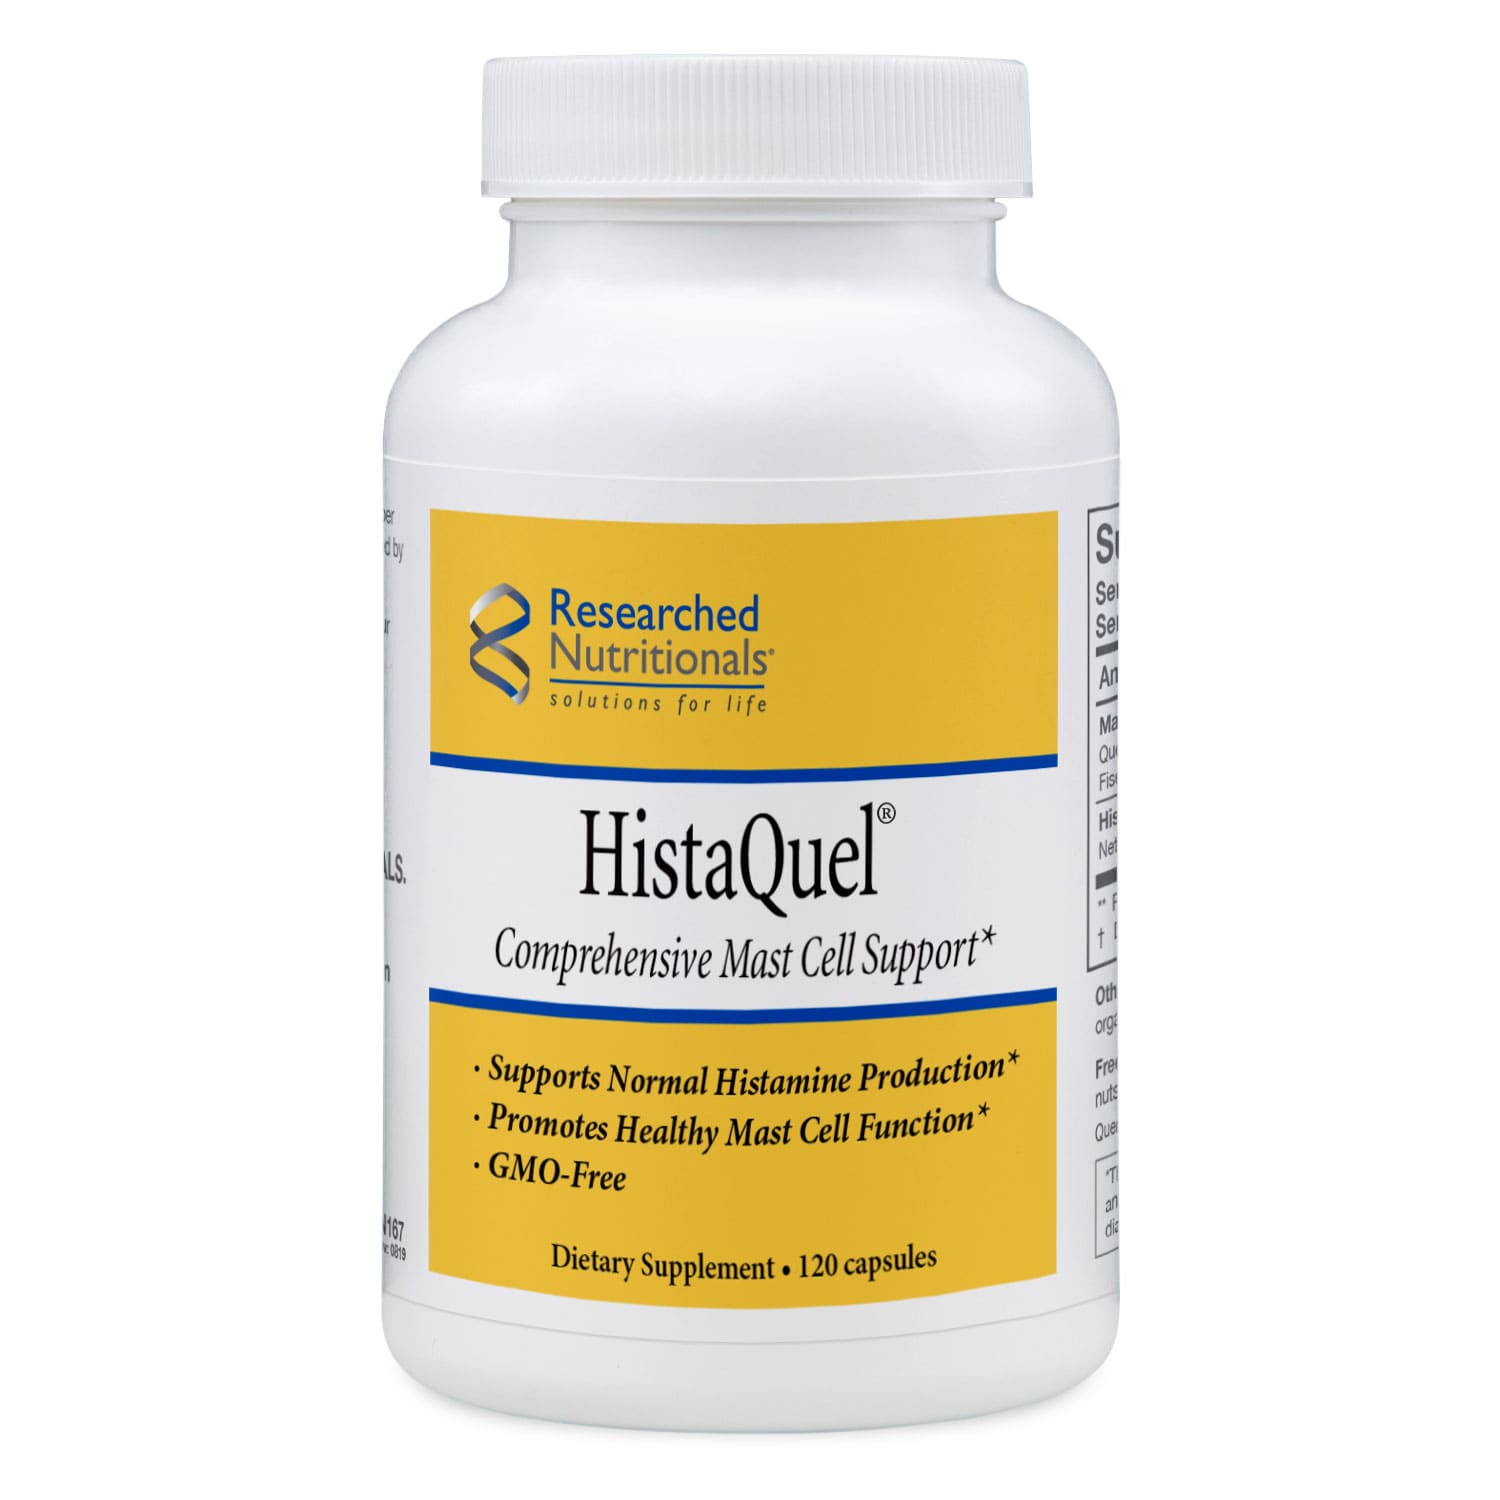 RESEARCHED NUTRITIONALS - HistaQuel